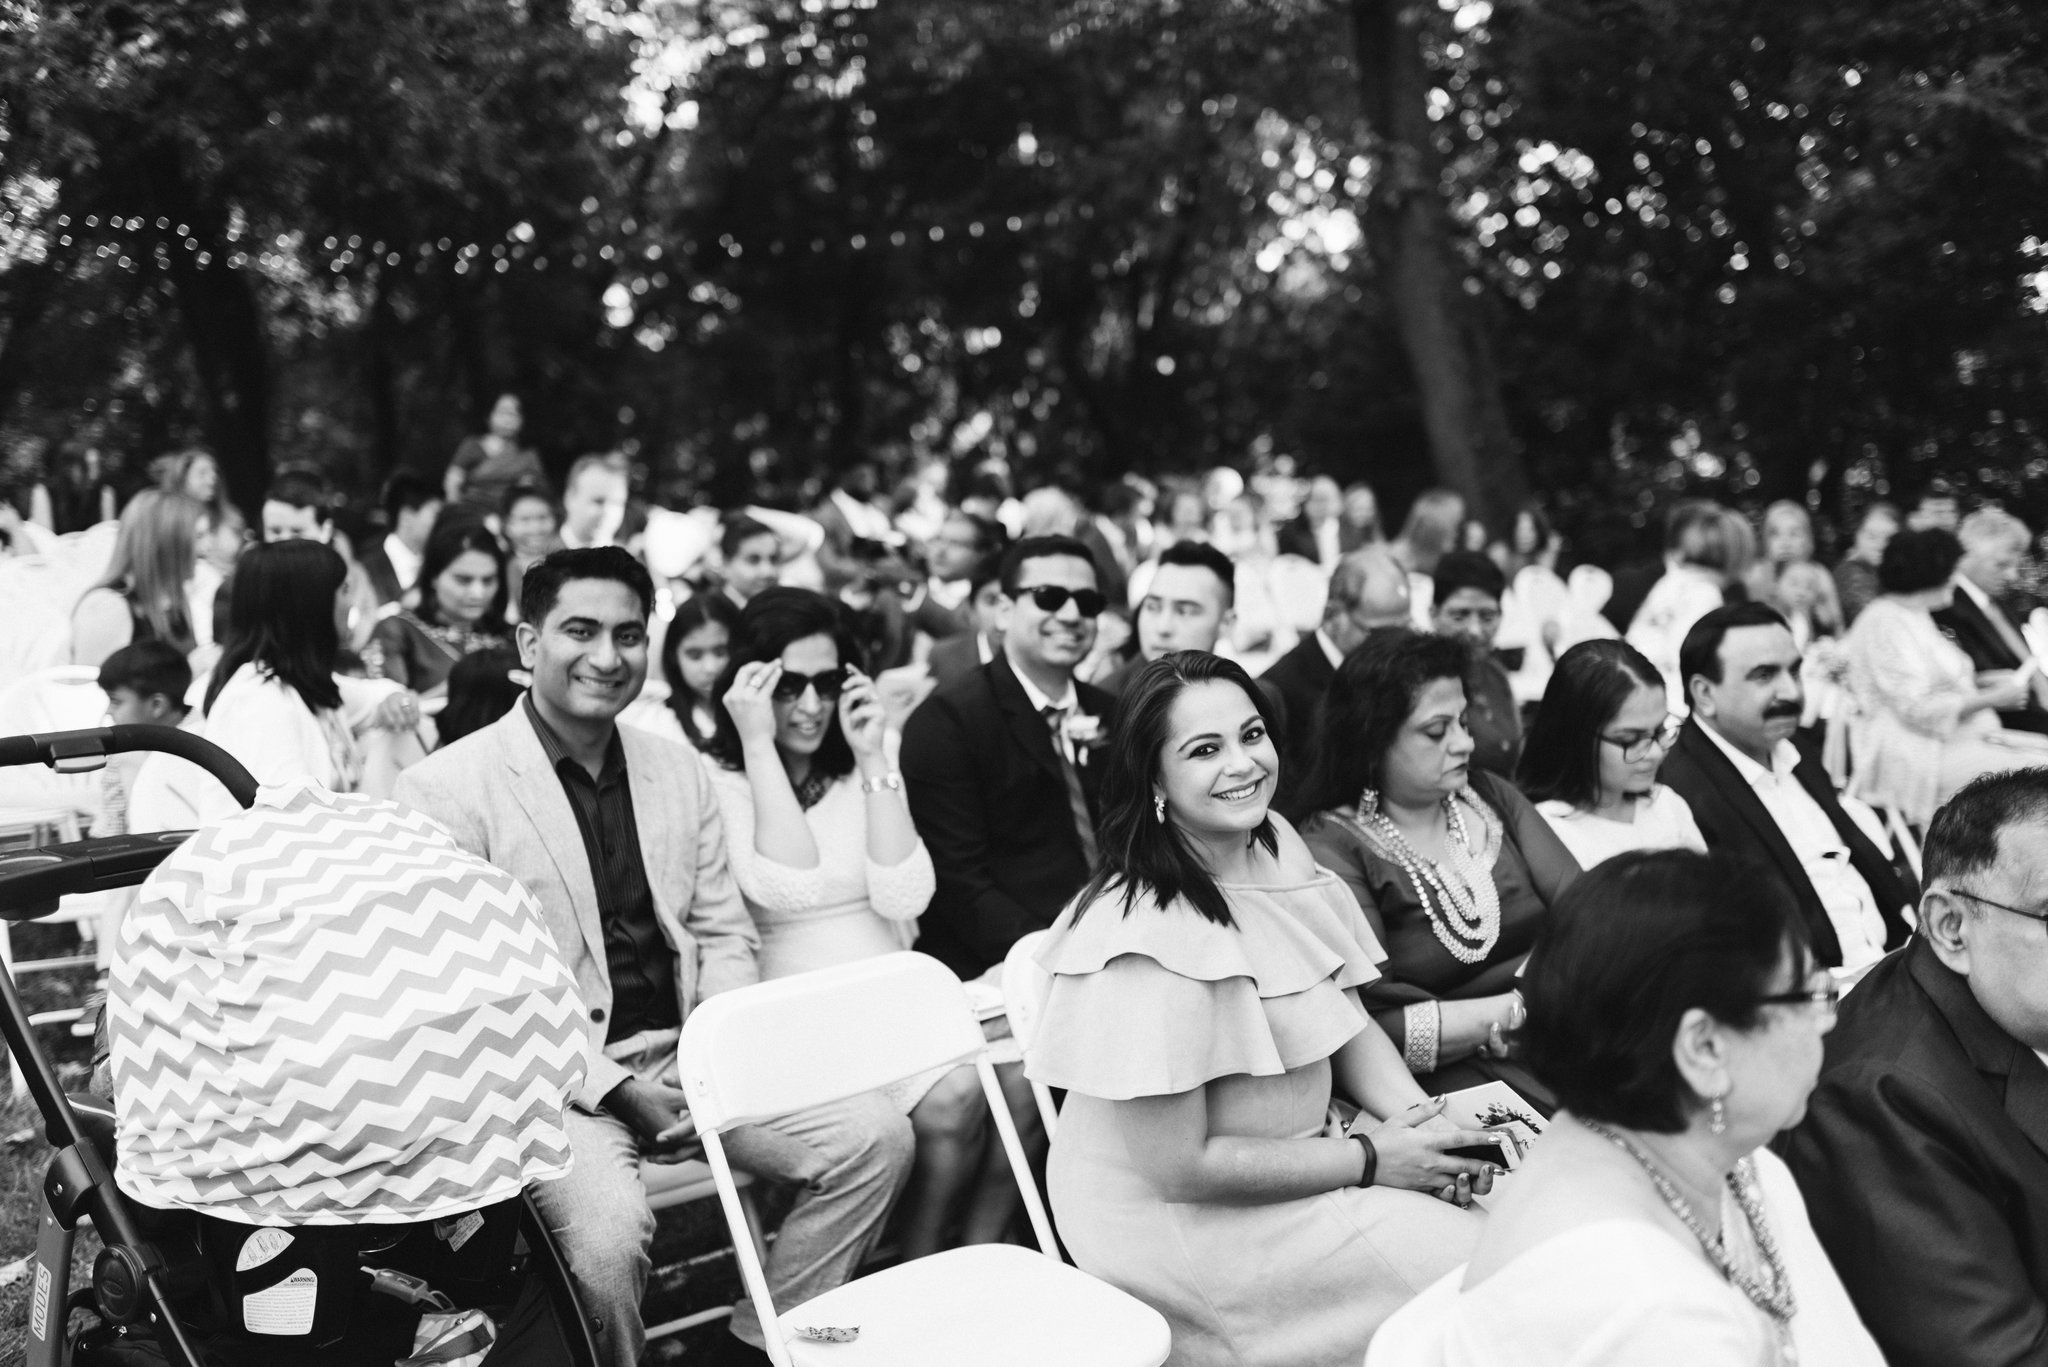  Ellicott City, Baltimore Wedding Photographer, Wayside Inn, Summer Wedding, Romantic, Traditional, Wedding Guests at Outdoor Ceremony, Black and White Photo 